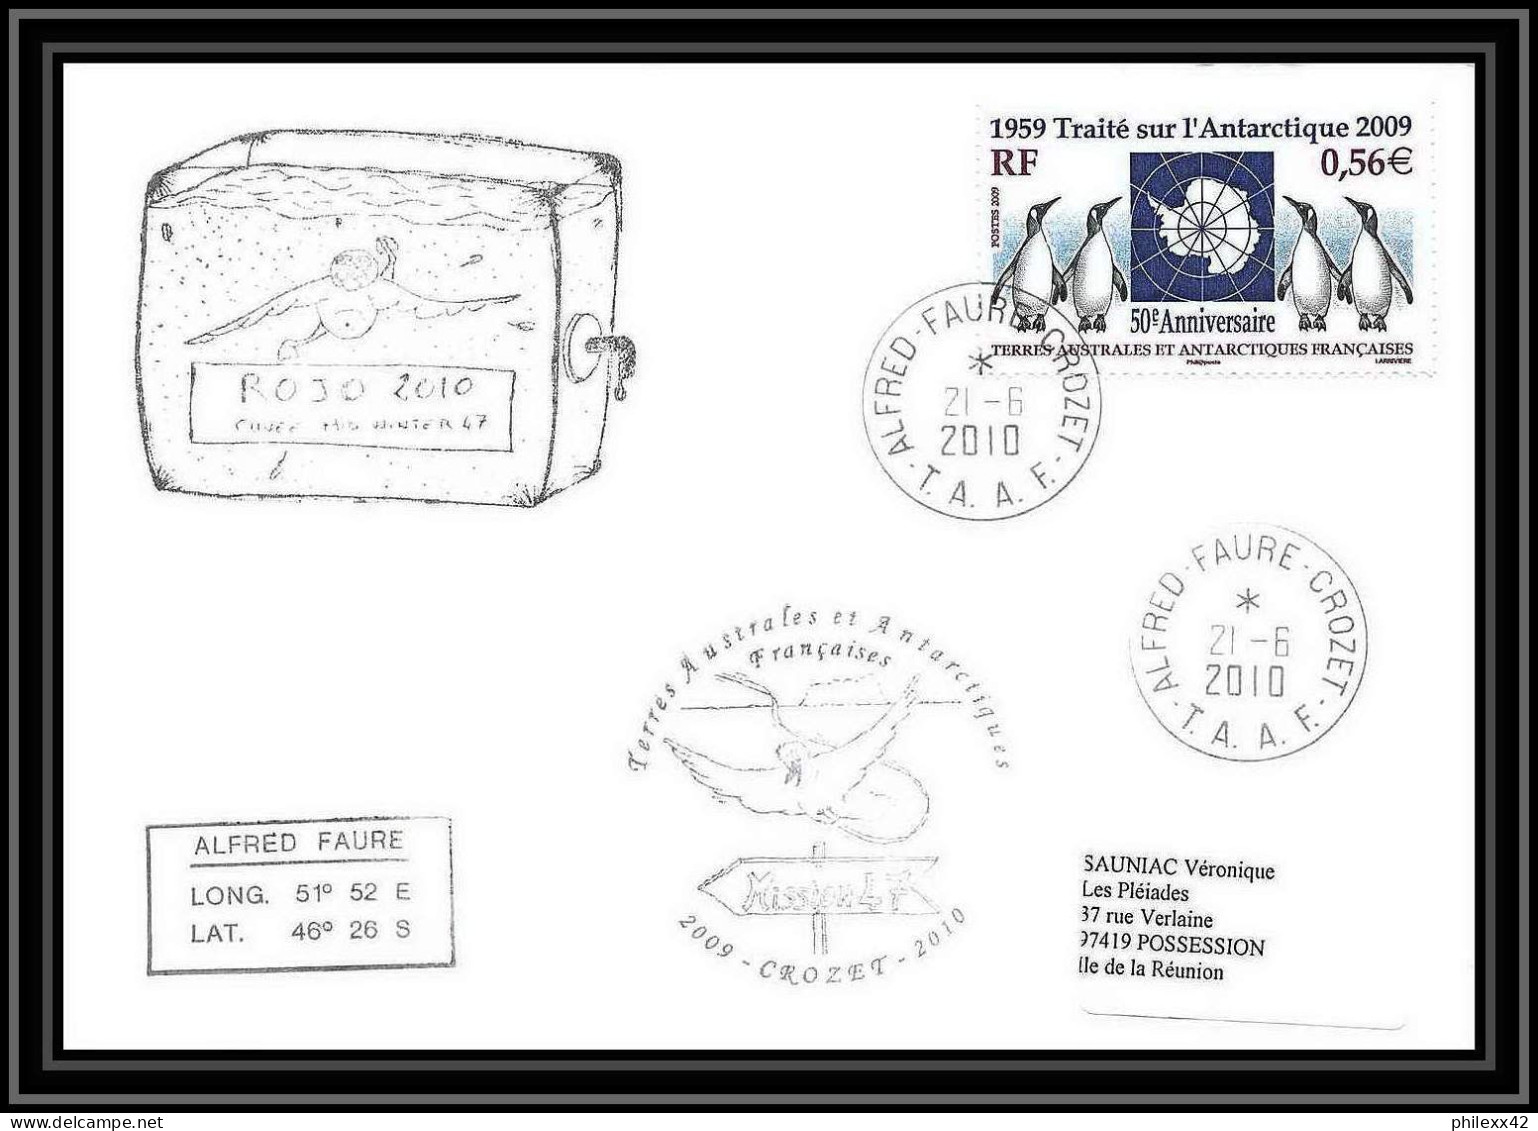 3010 Dufresne 2 Crozet Mission 47 21/6/2010 N°551 ANTARCTIC Terres Australes (taaf) Lettre Cover - Lettres & Documents